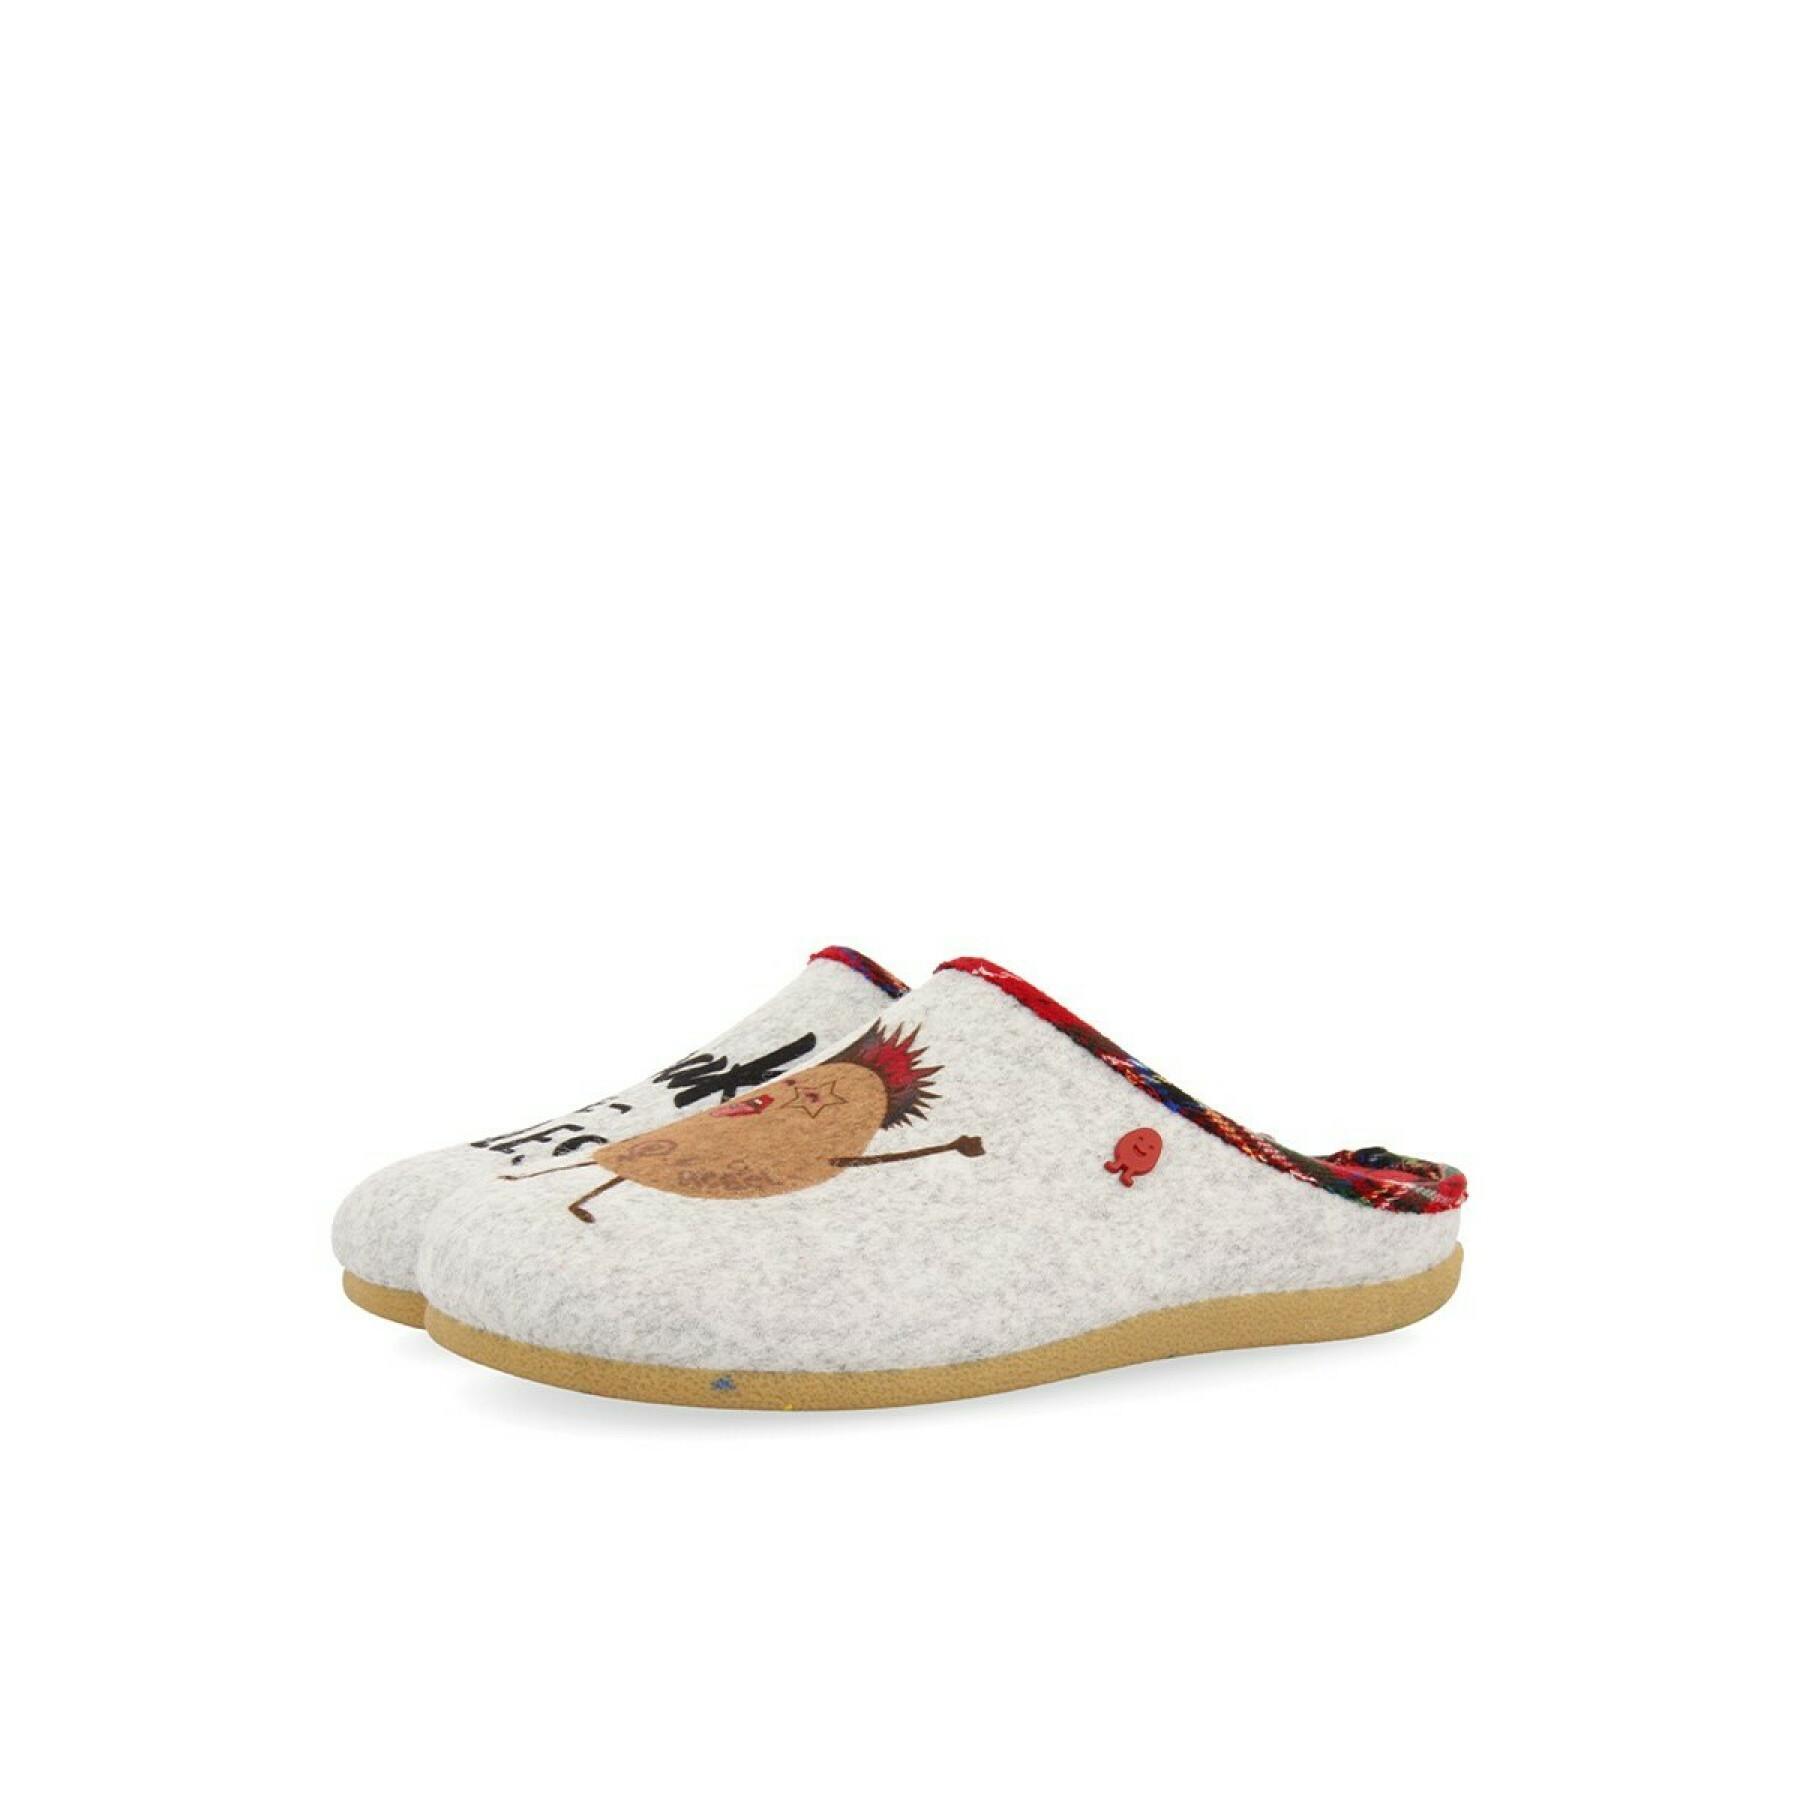 Slippers from the women's collection Hot Potatoes abtenau